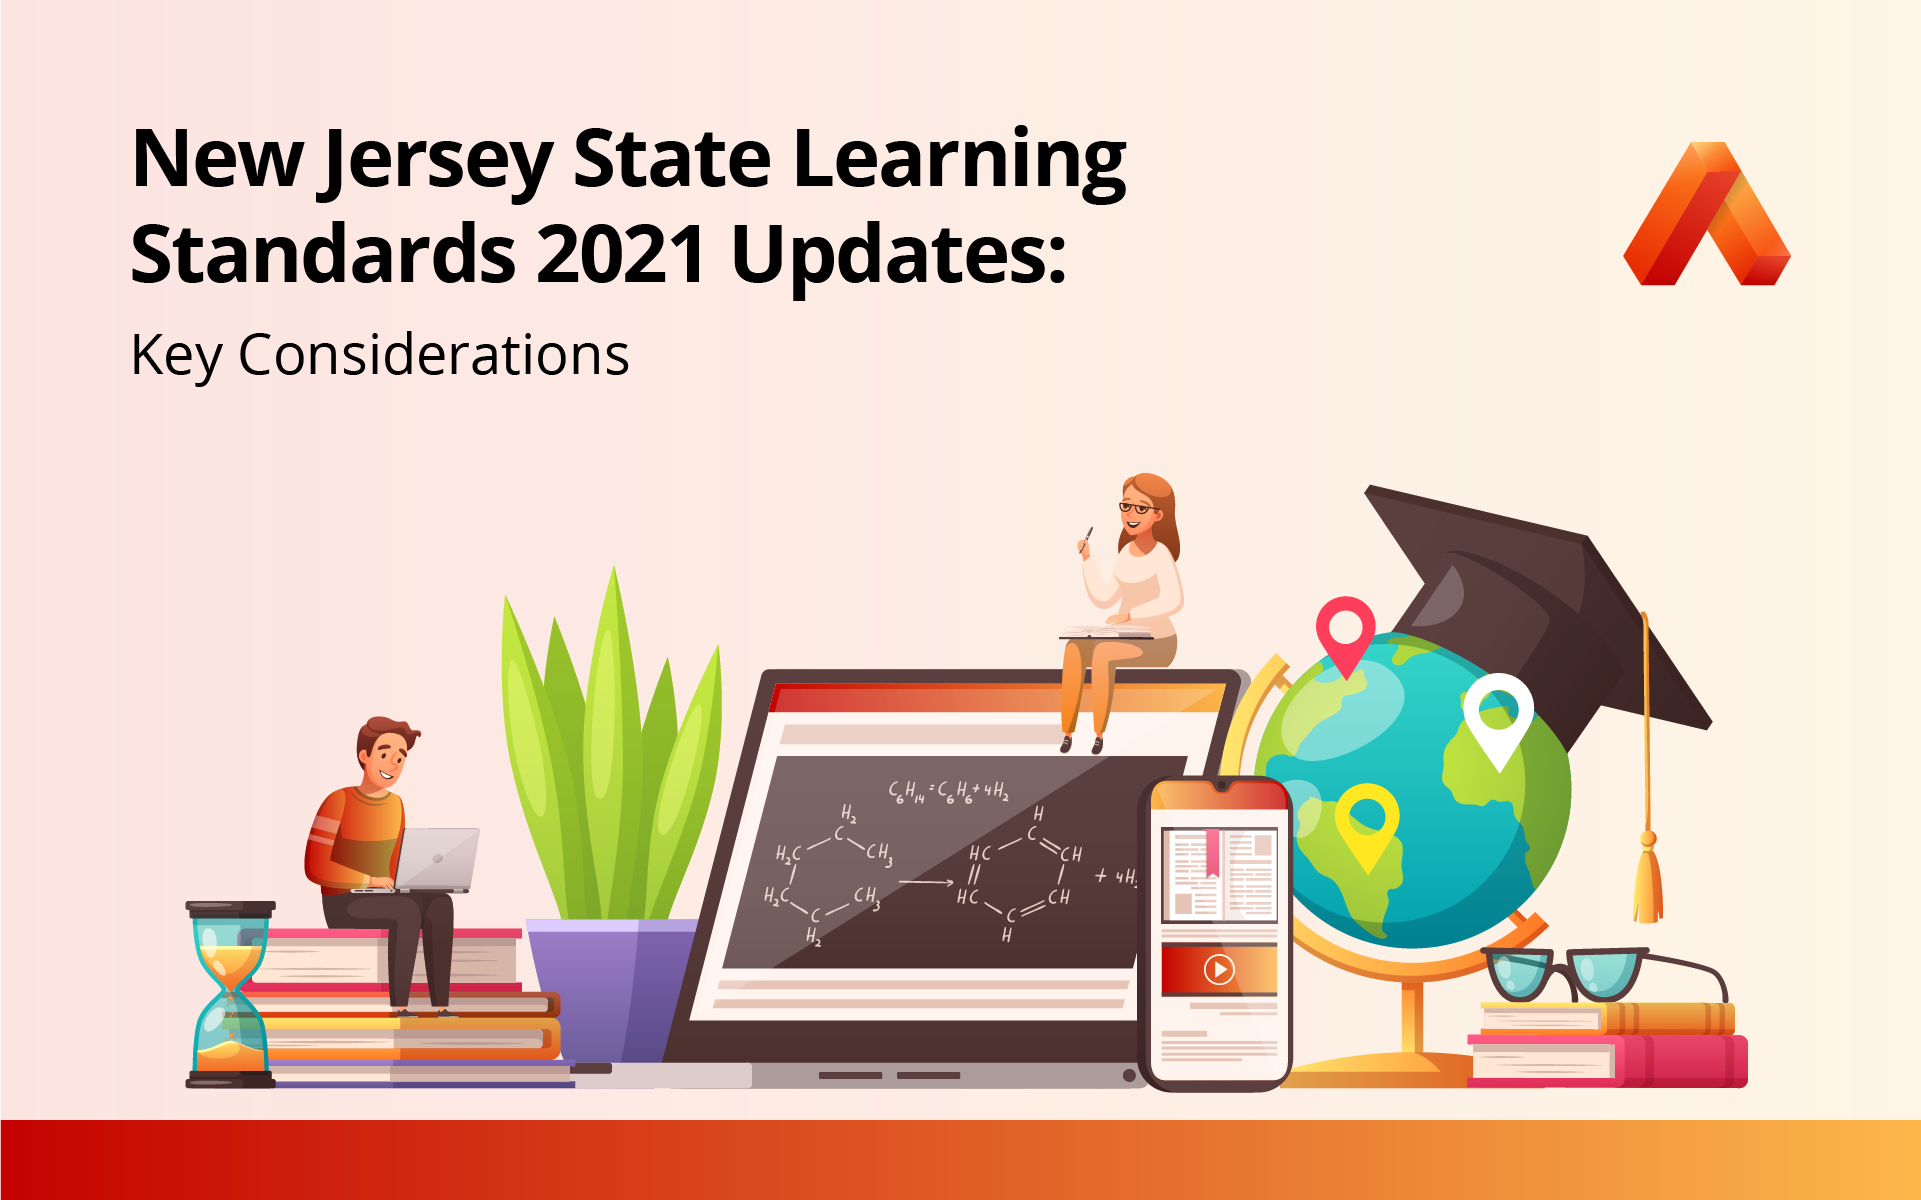 New Jersey State Learning Standards 2021 Updates 02@2x (2)